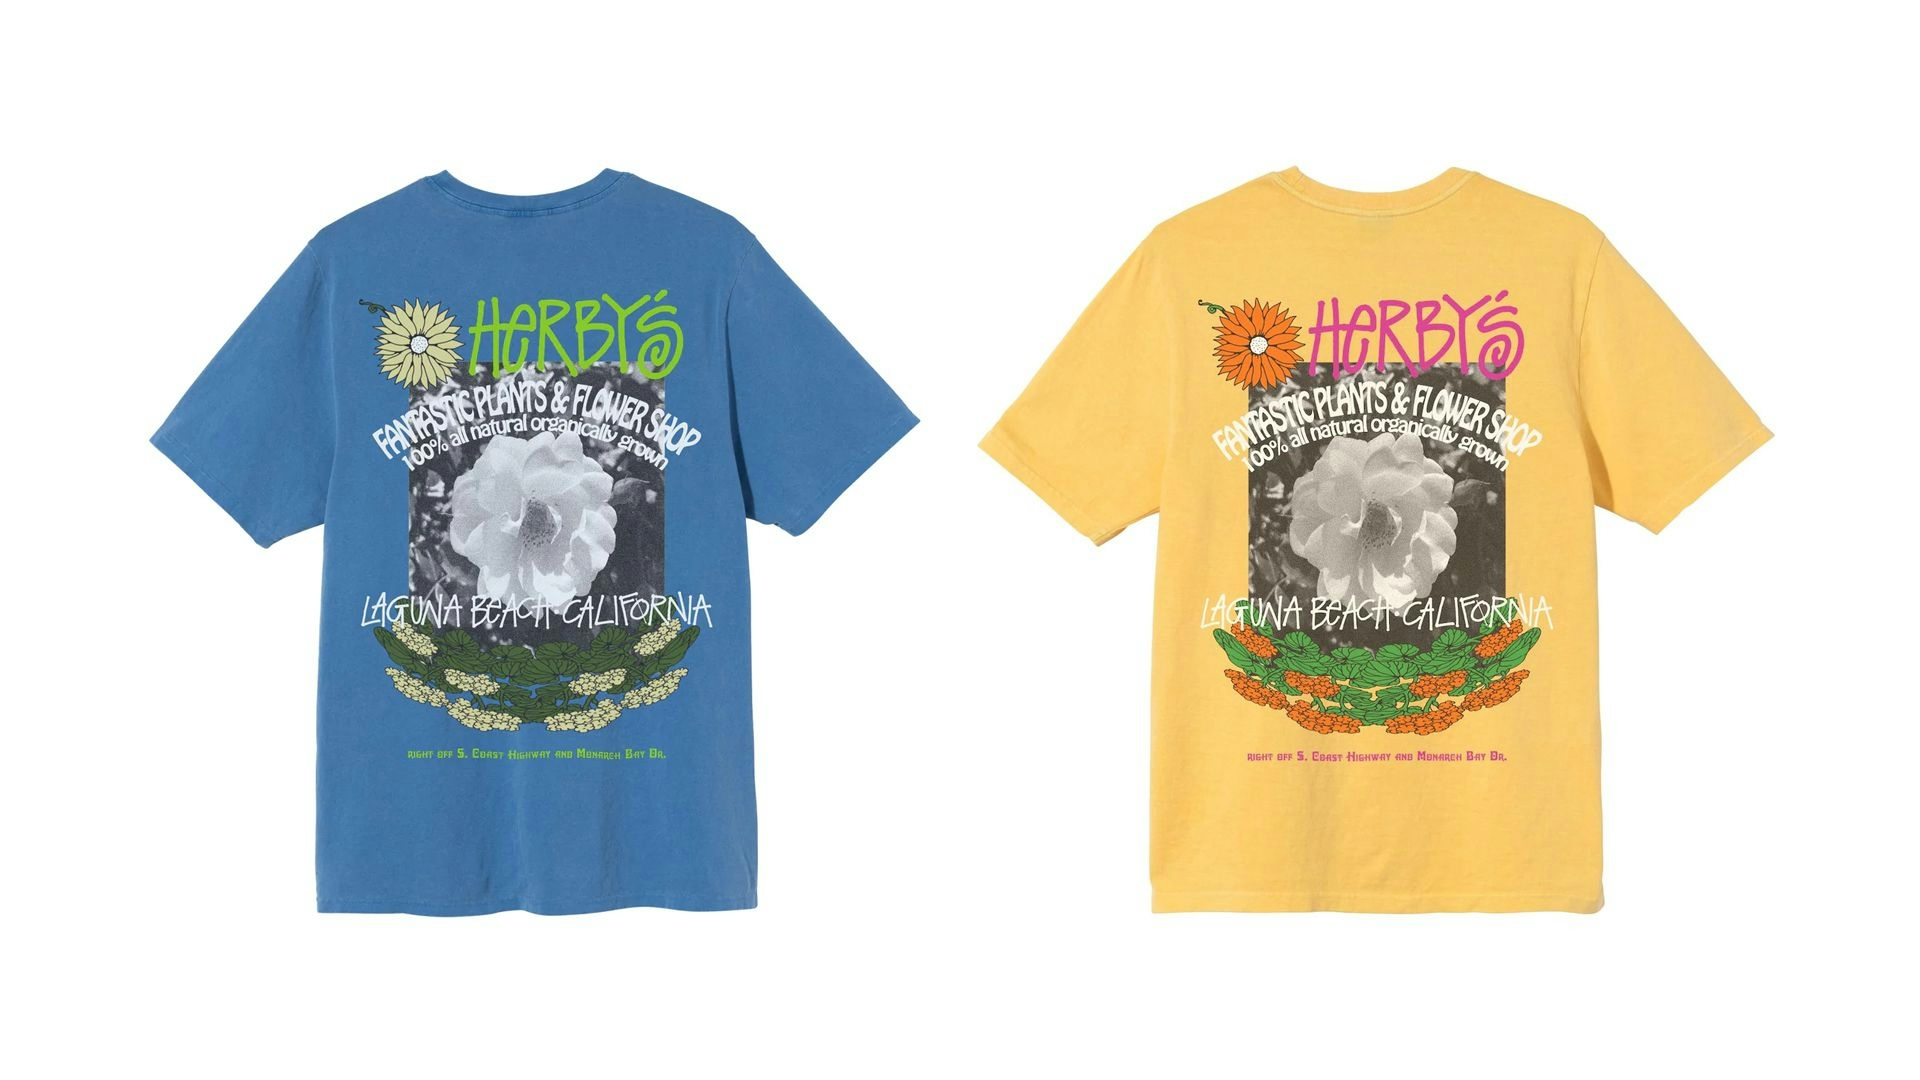 Graphic tees in blue and yellow flat-lay for the Stussy SS Printed Graphics capsule